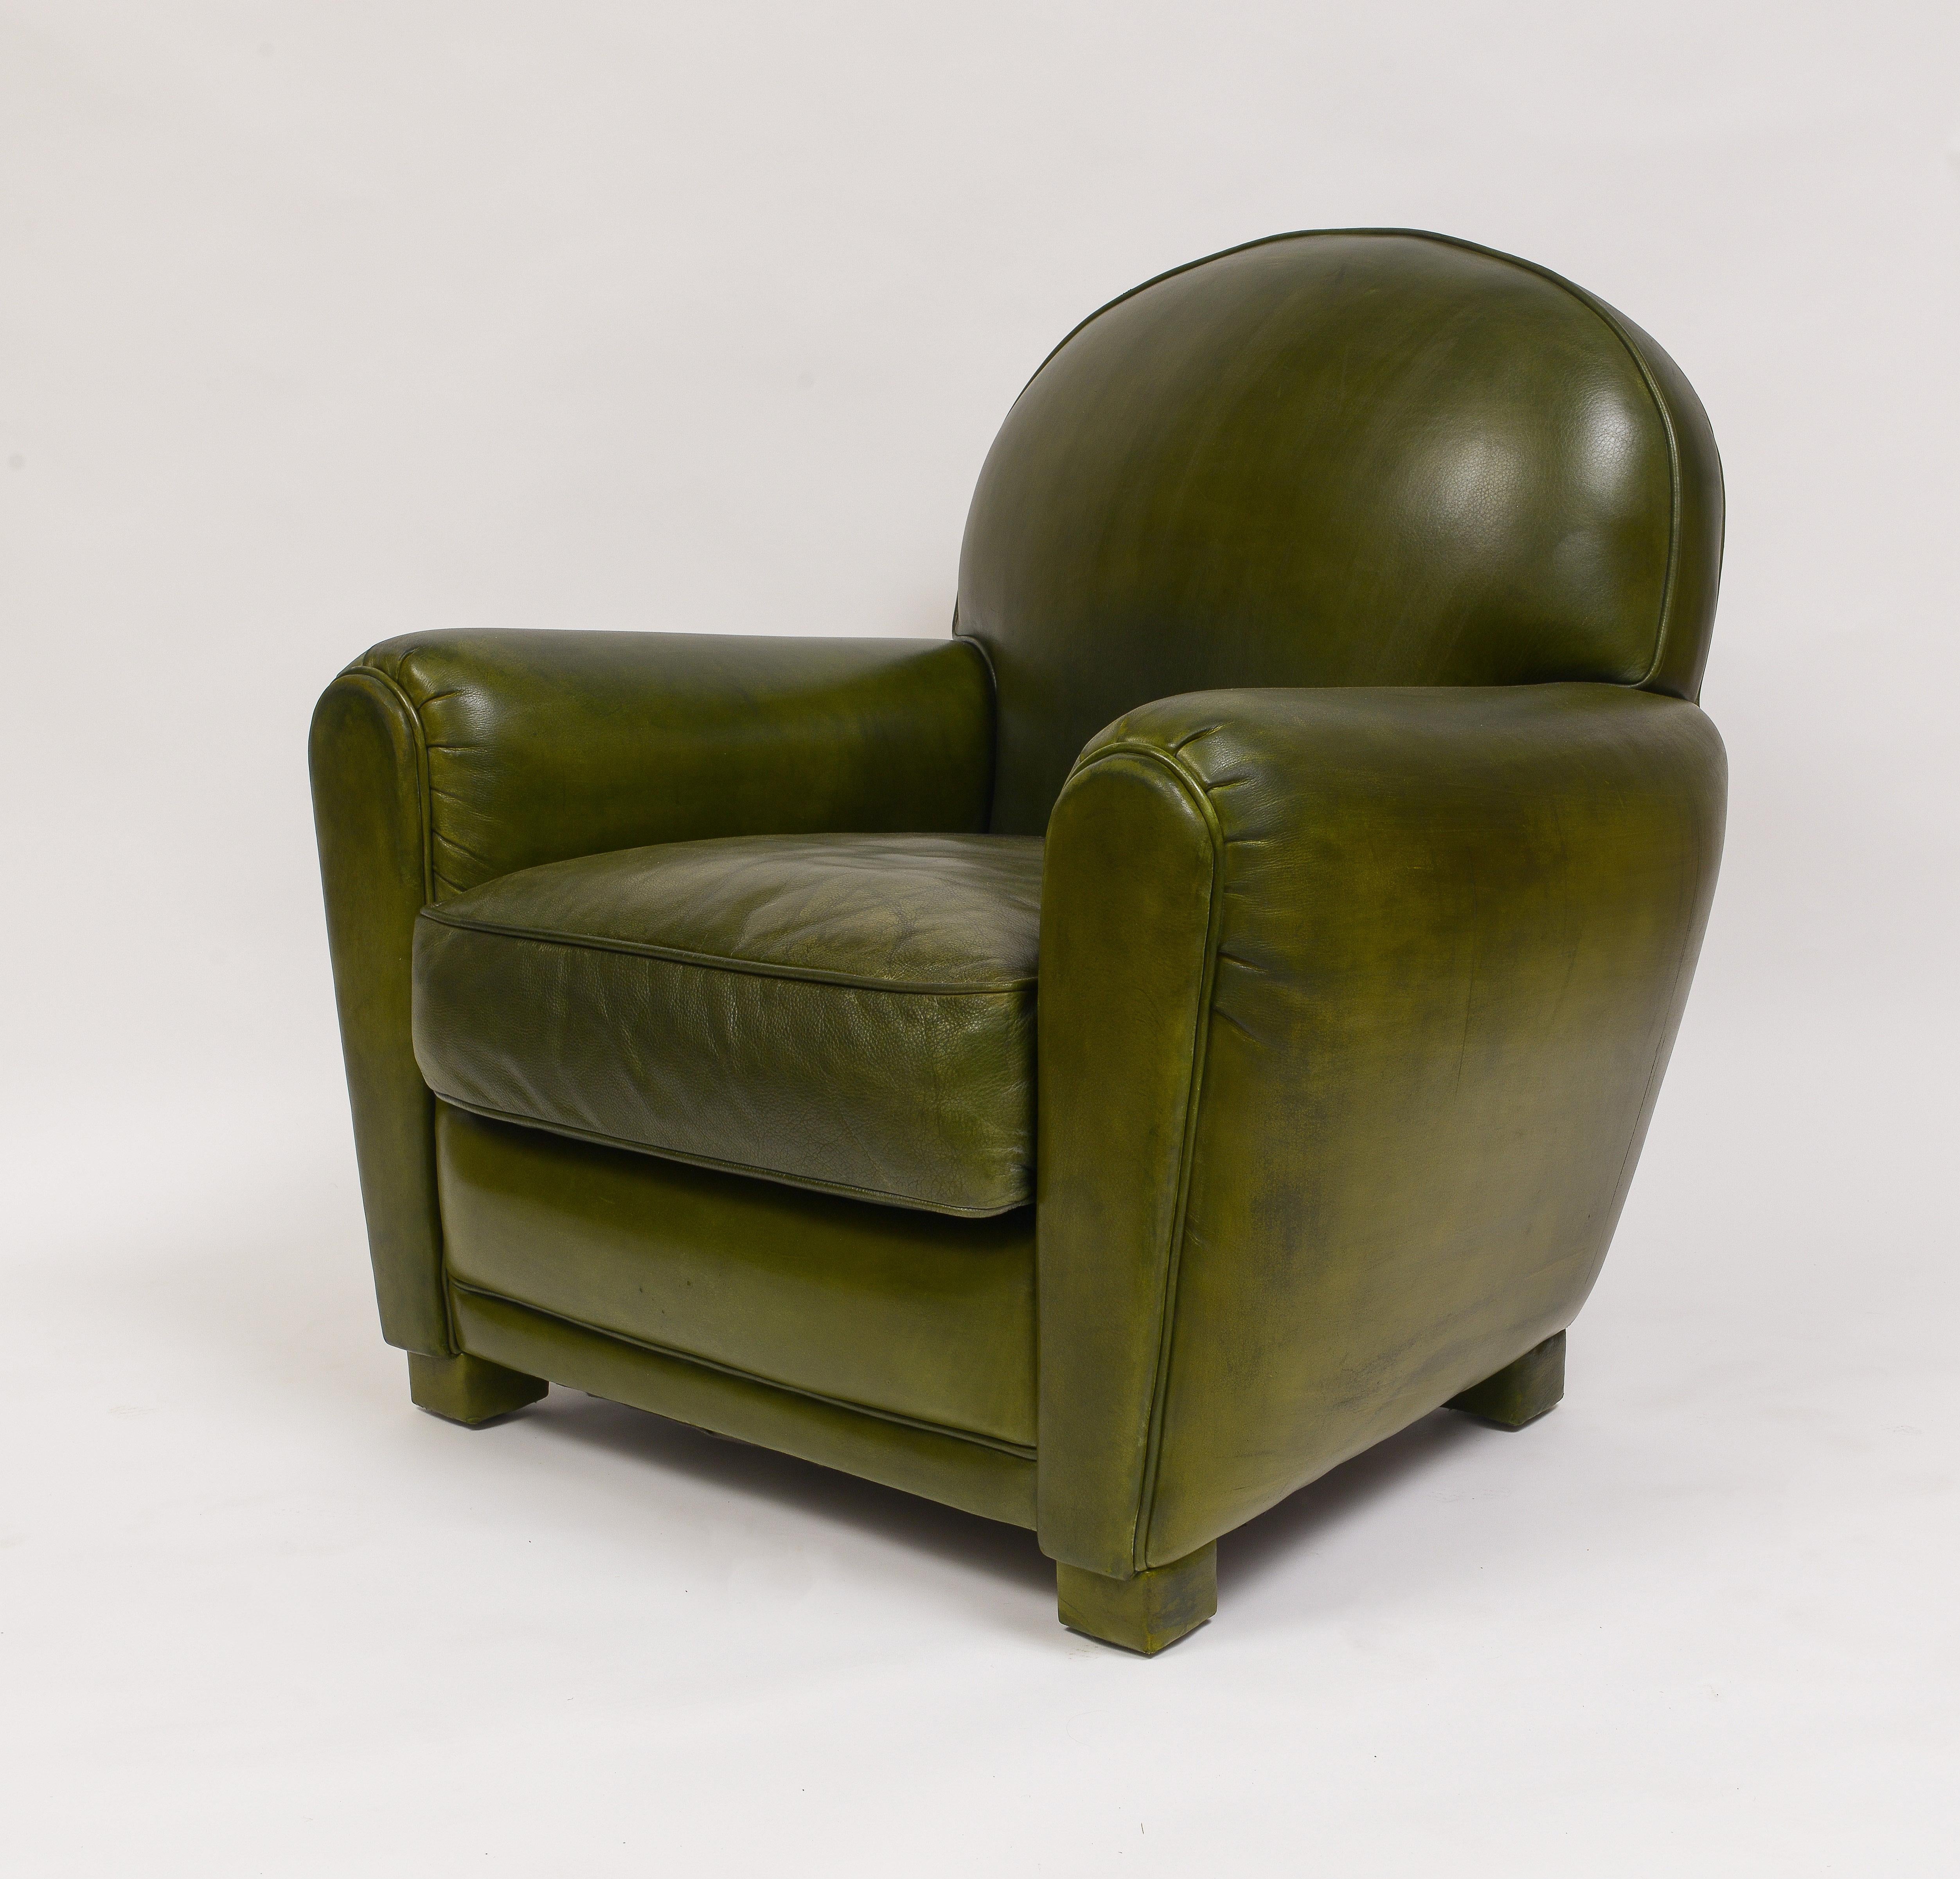 Contemporary Early 21st Century Green Leather Club Chairs With Ottomans- 4 Pieces For Sale